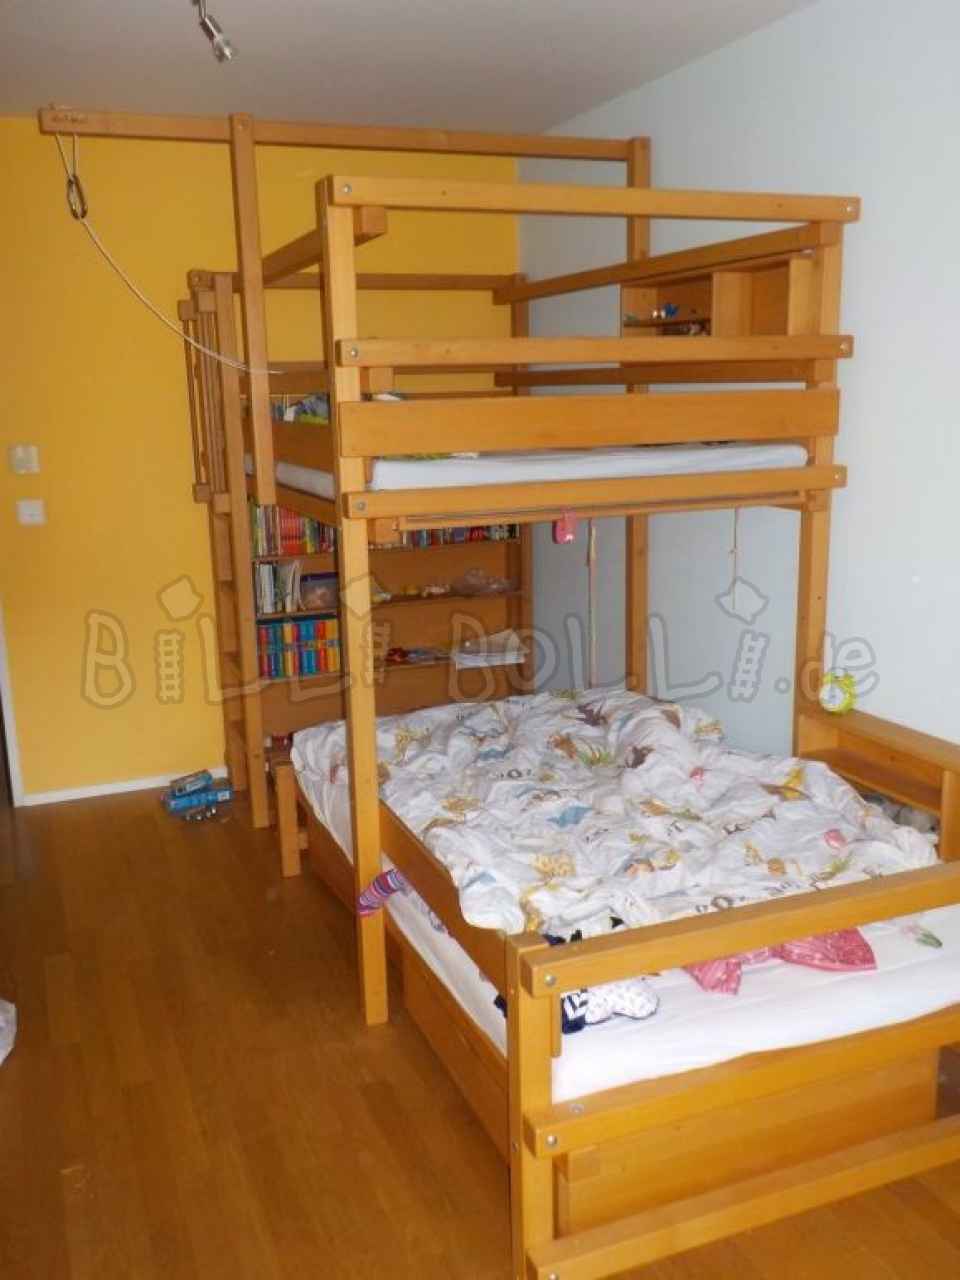 Laterally offset bunk bed (Category: second hand bunk bed)